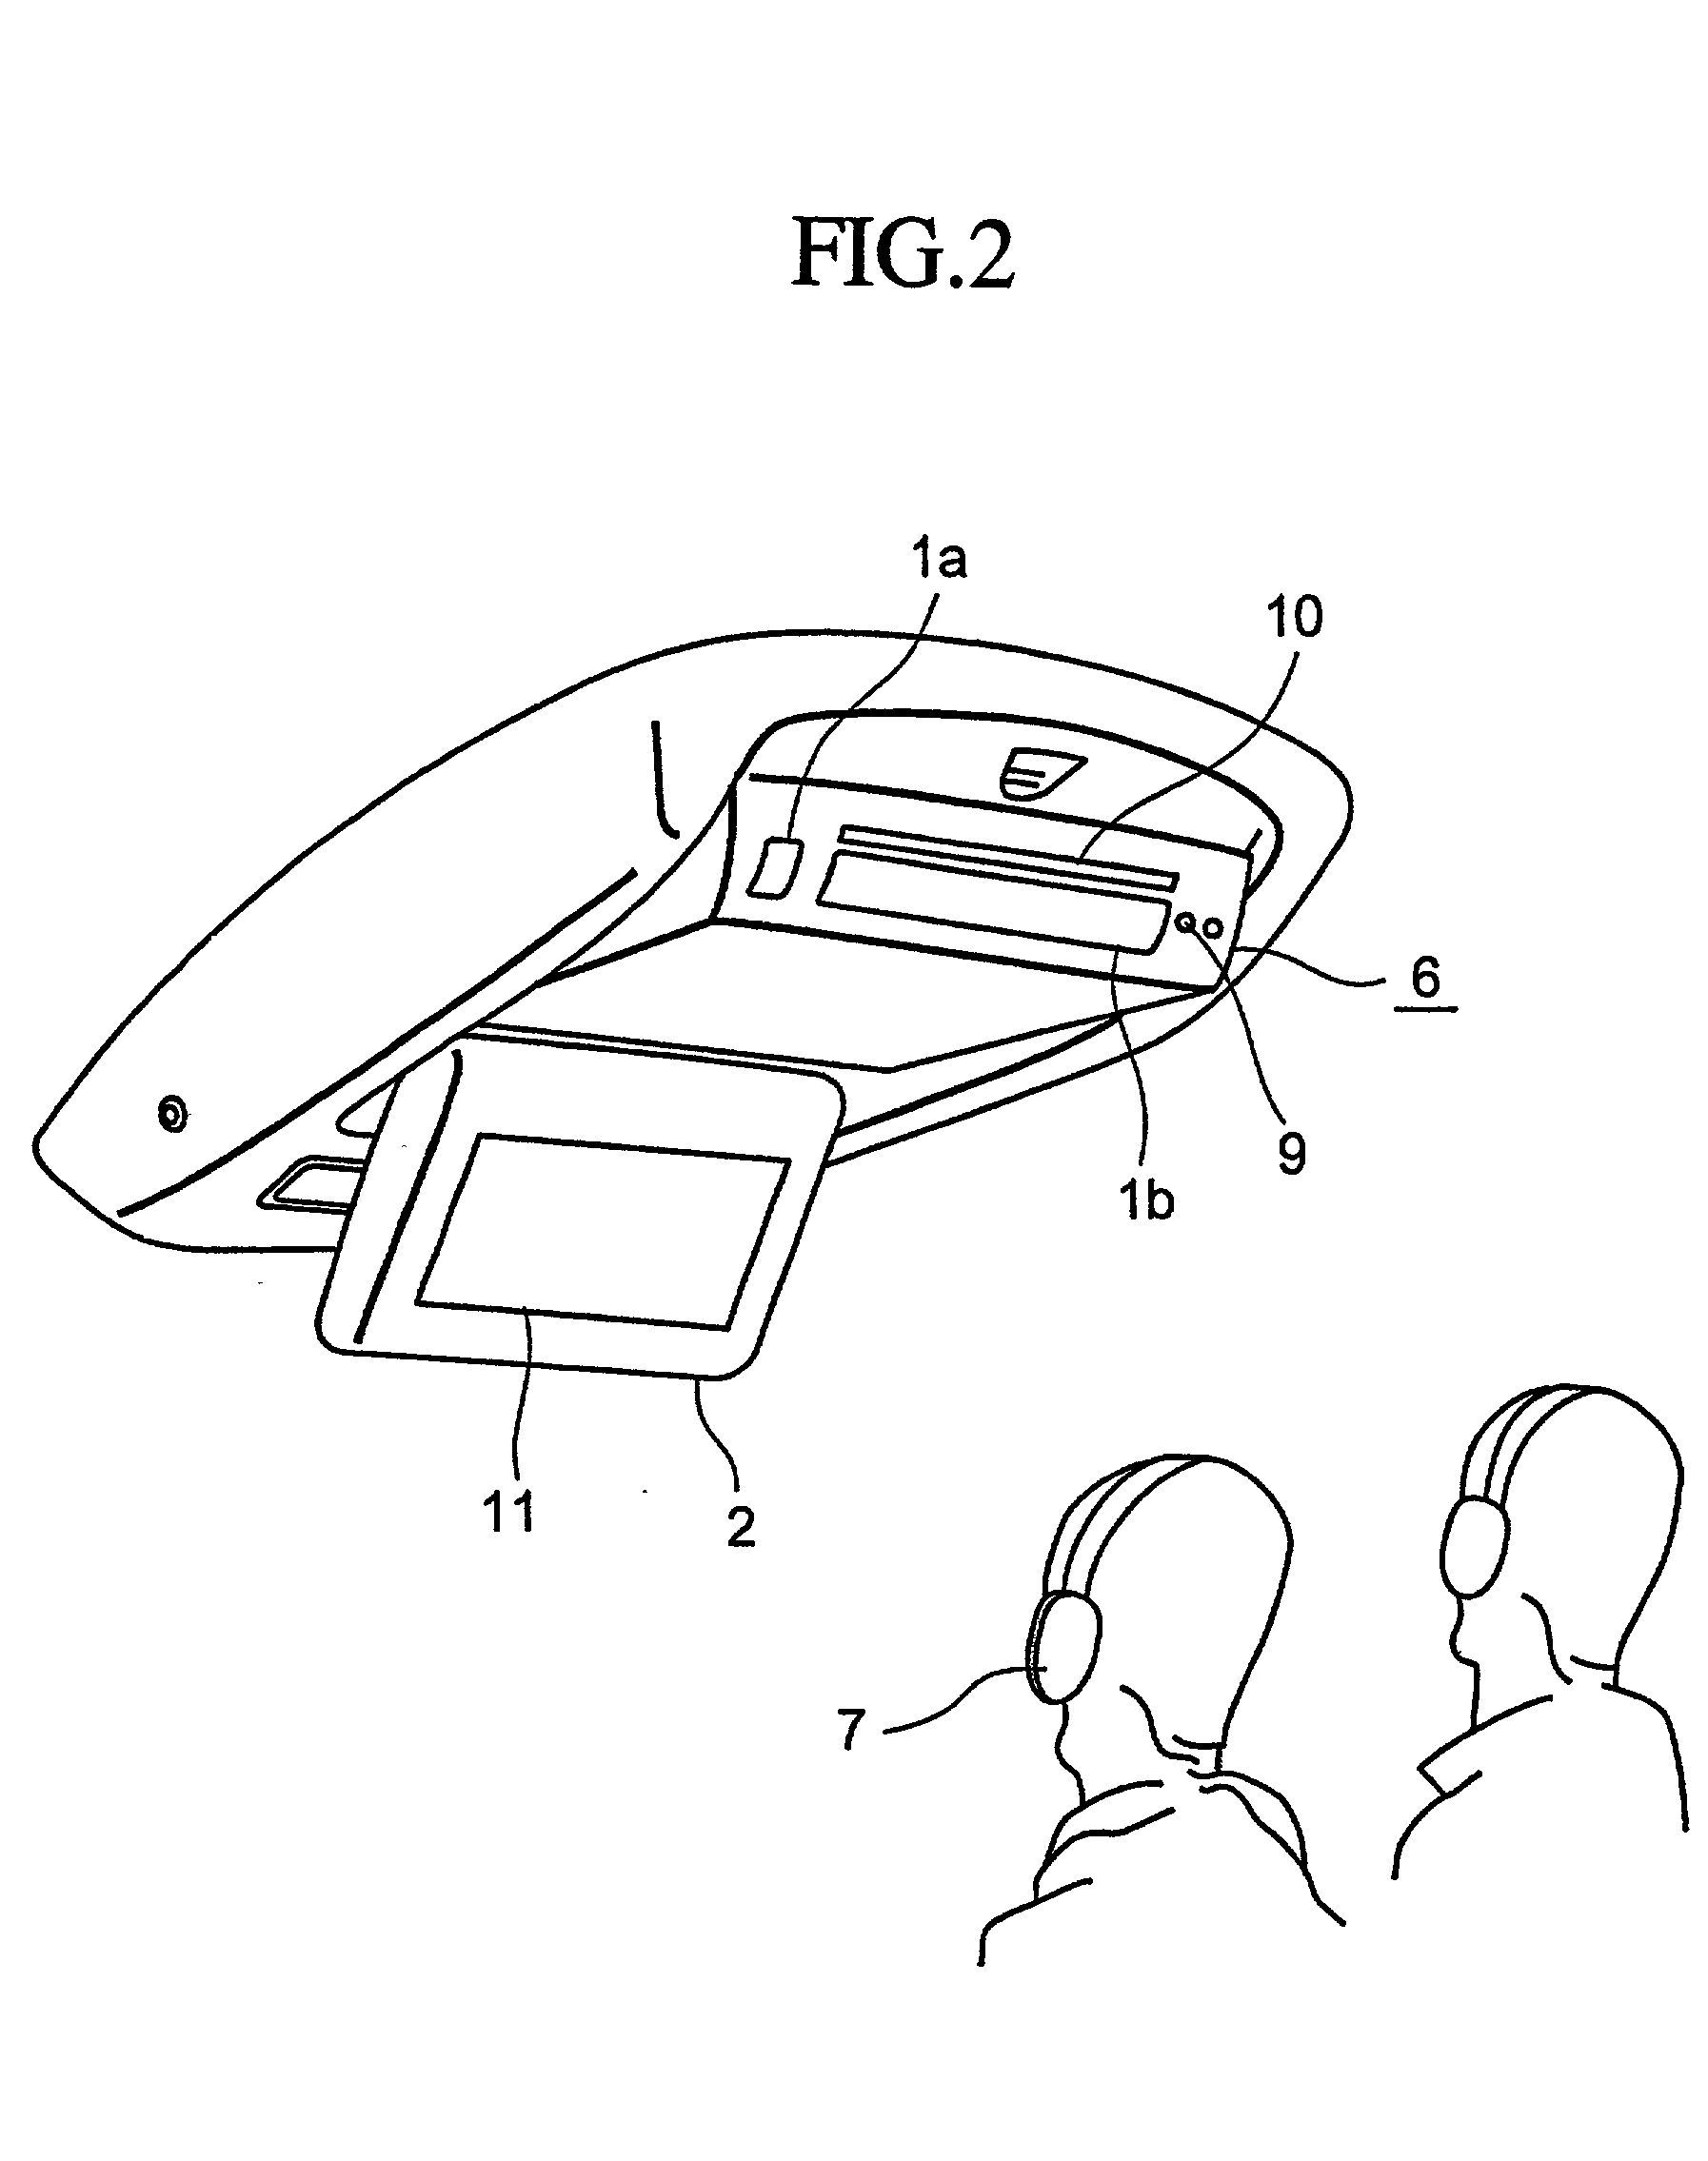 Image reproducing device